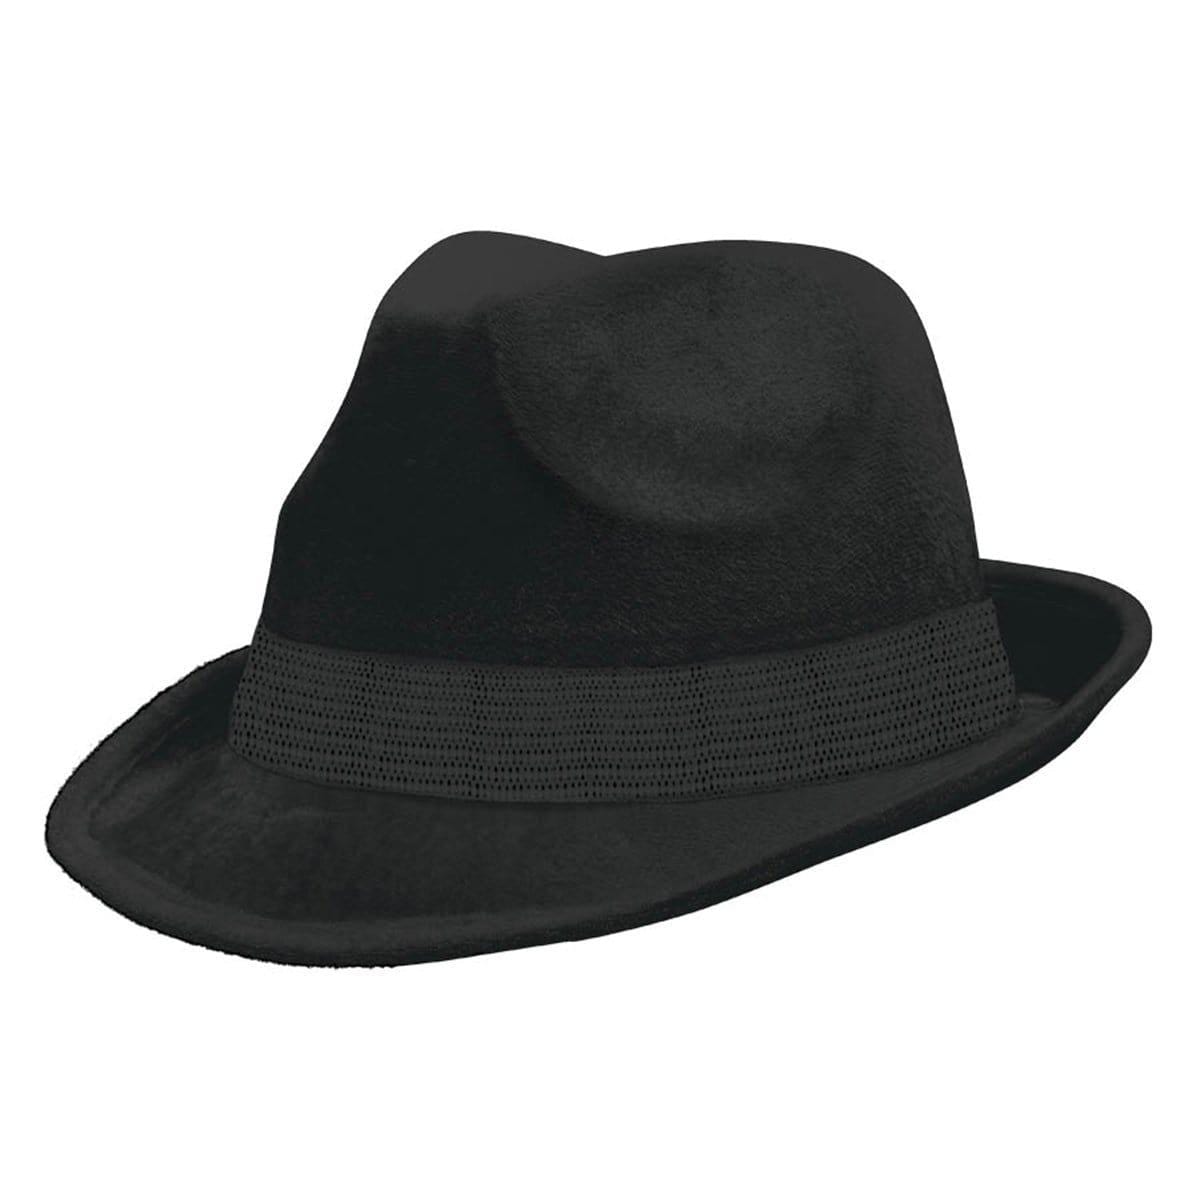 Buy Costume Accessories Black velours fedora hat for adults sold at Party Expert